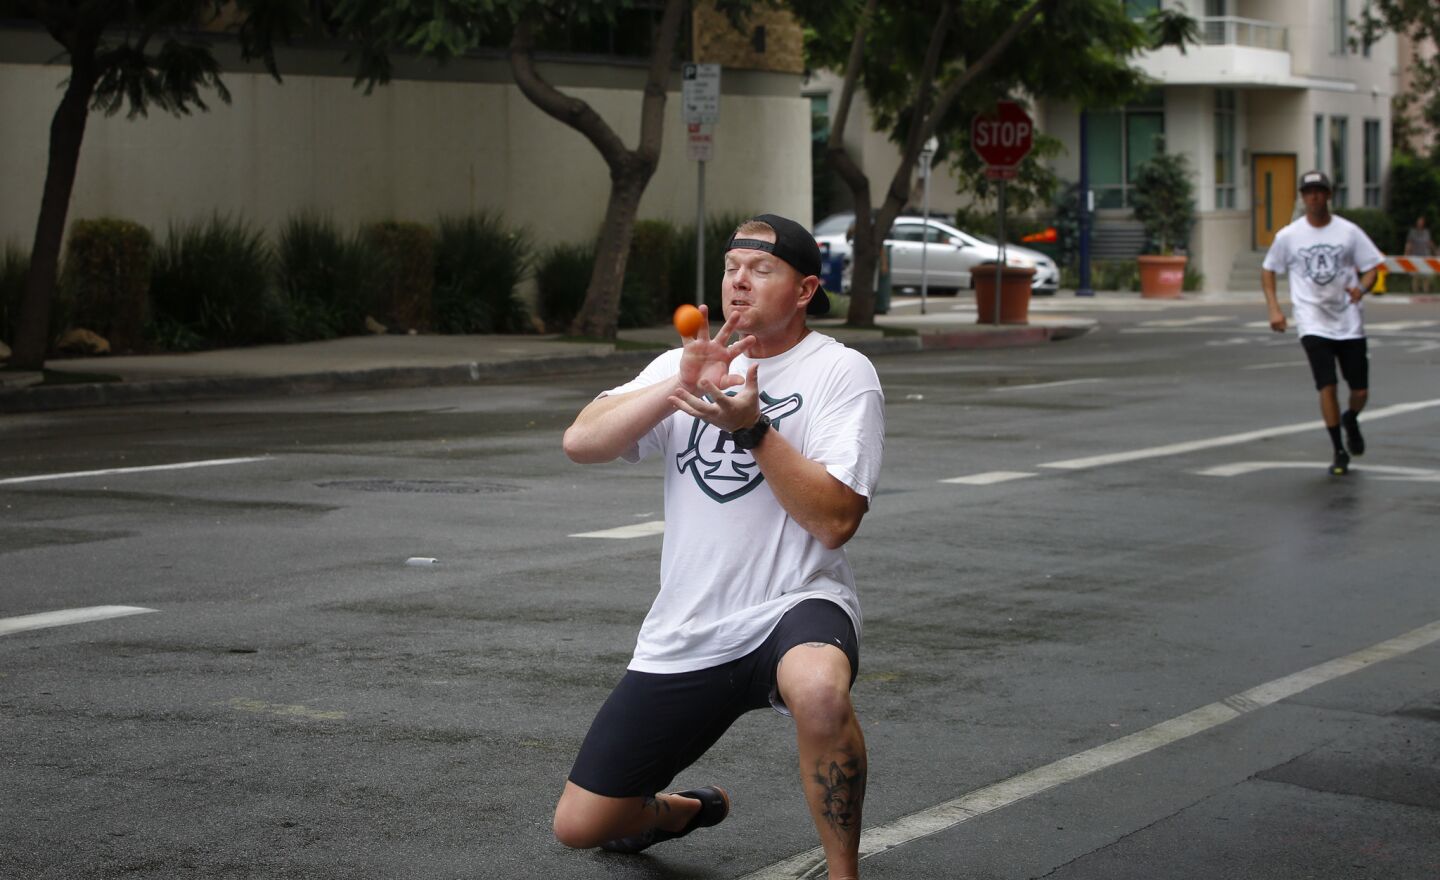 2017 Stickball tournament in Little Italy, San Diego